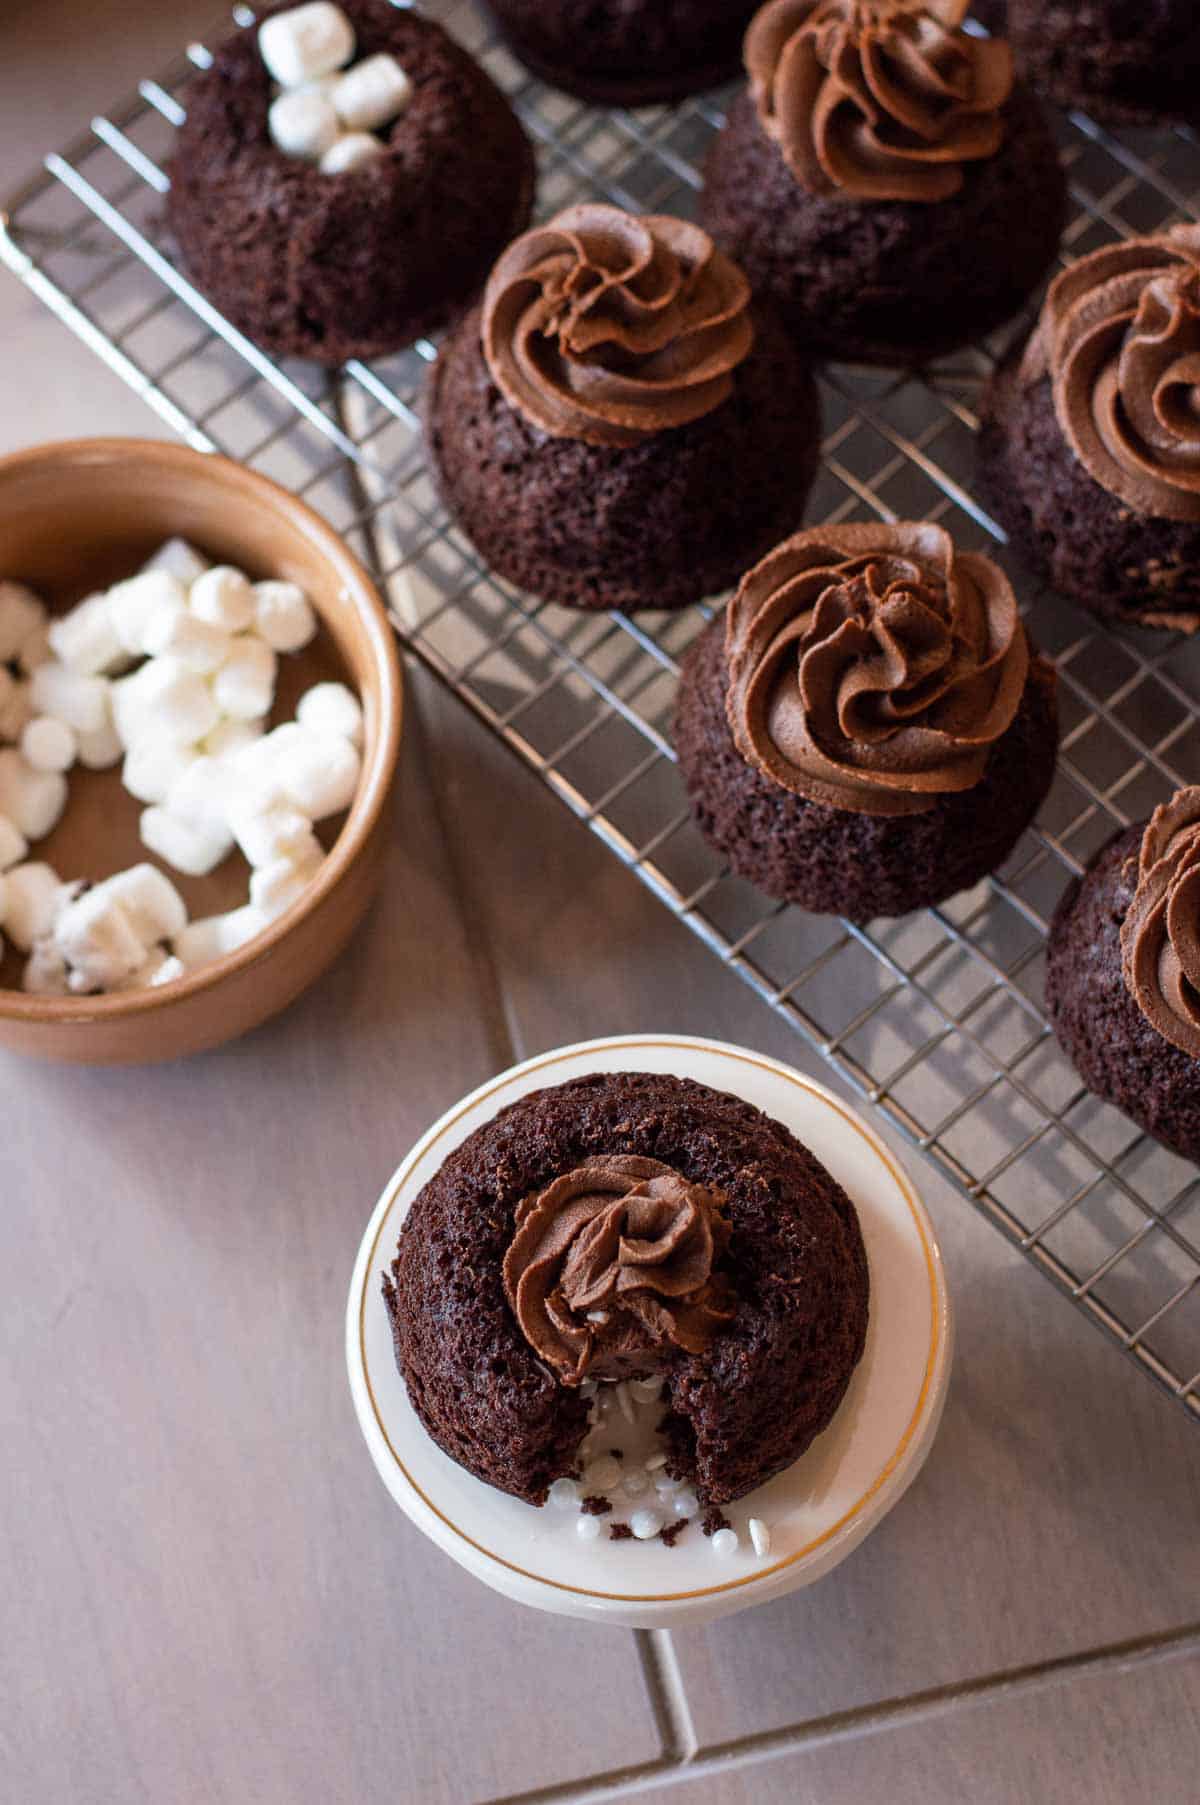 chocolate frosting on a chocolate cupcake